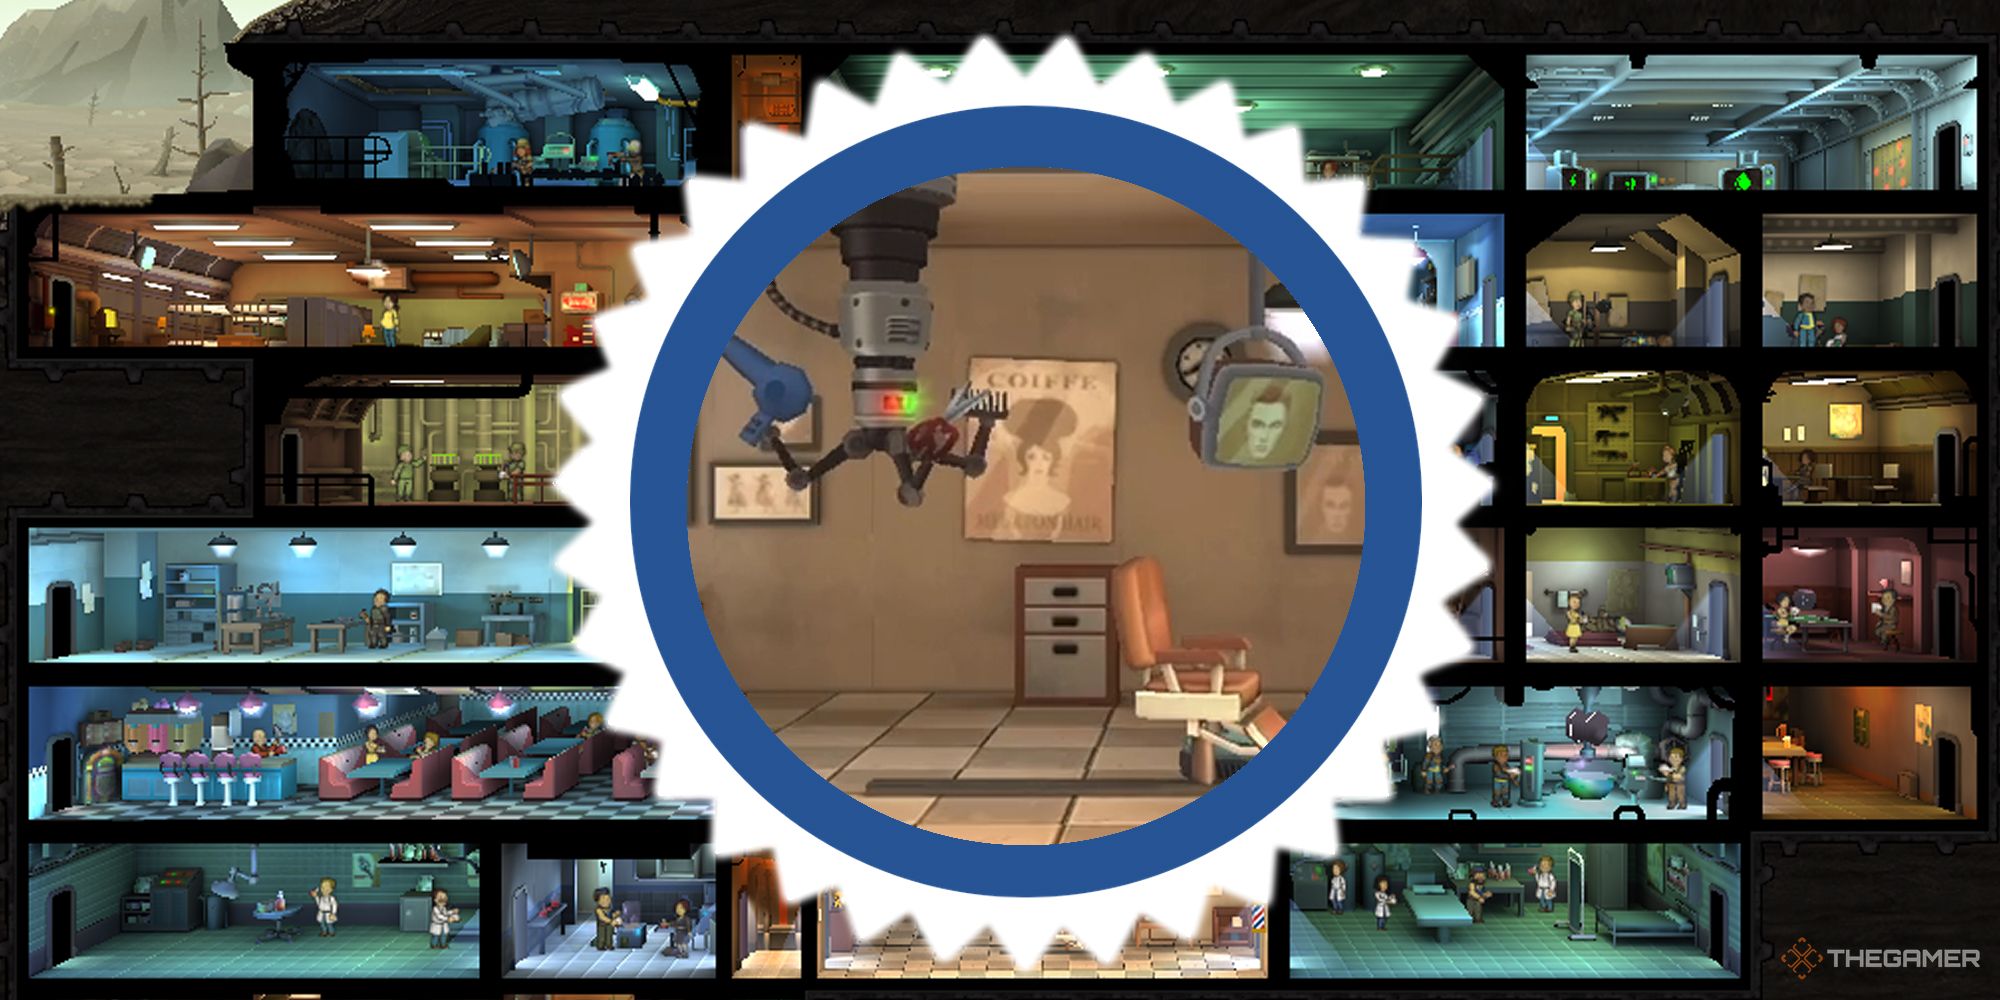 Fallout Shelter barbershop in an emblem over a Vault layout